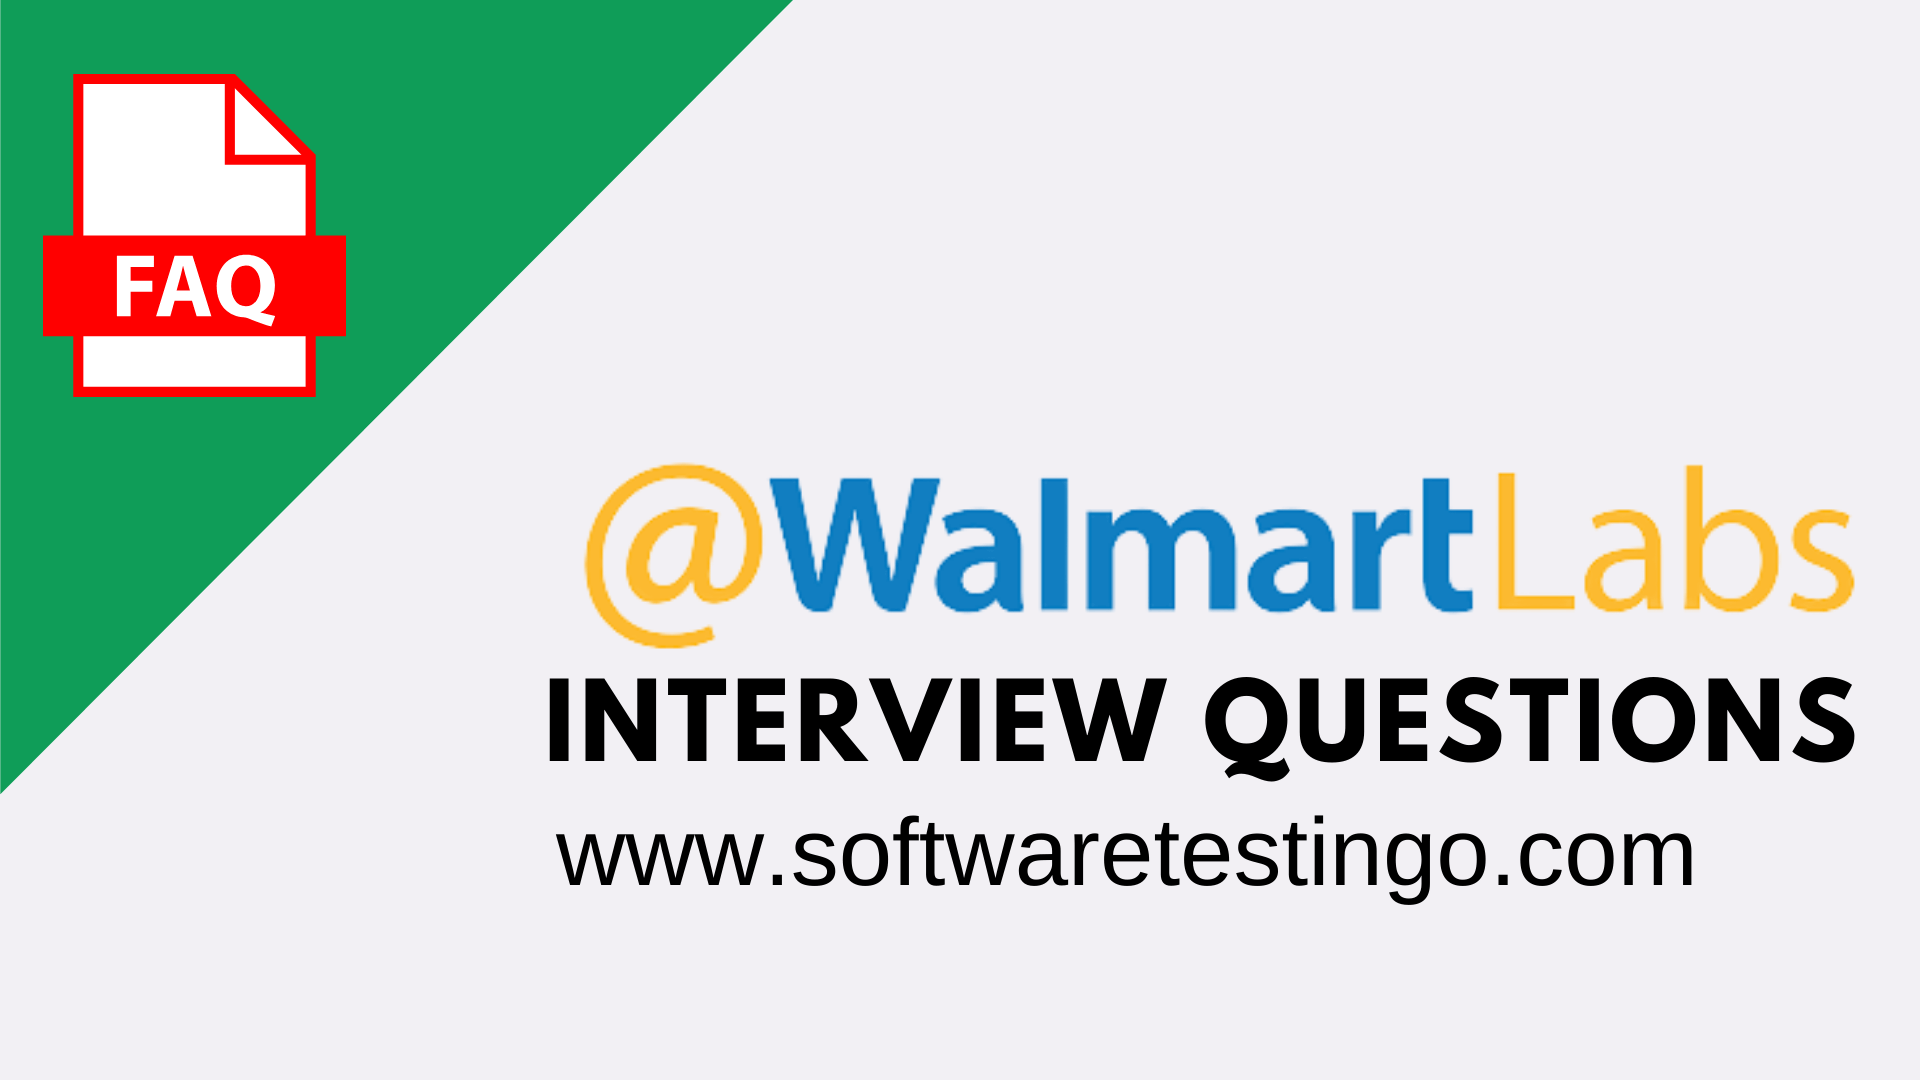 Walmart labs Interview Questions